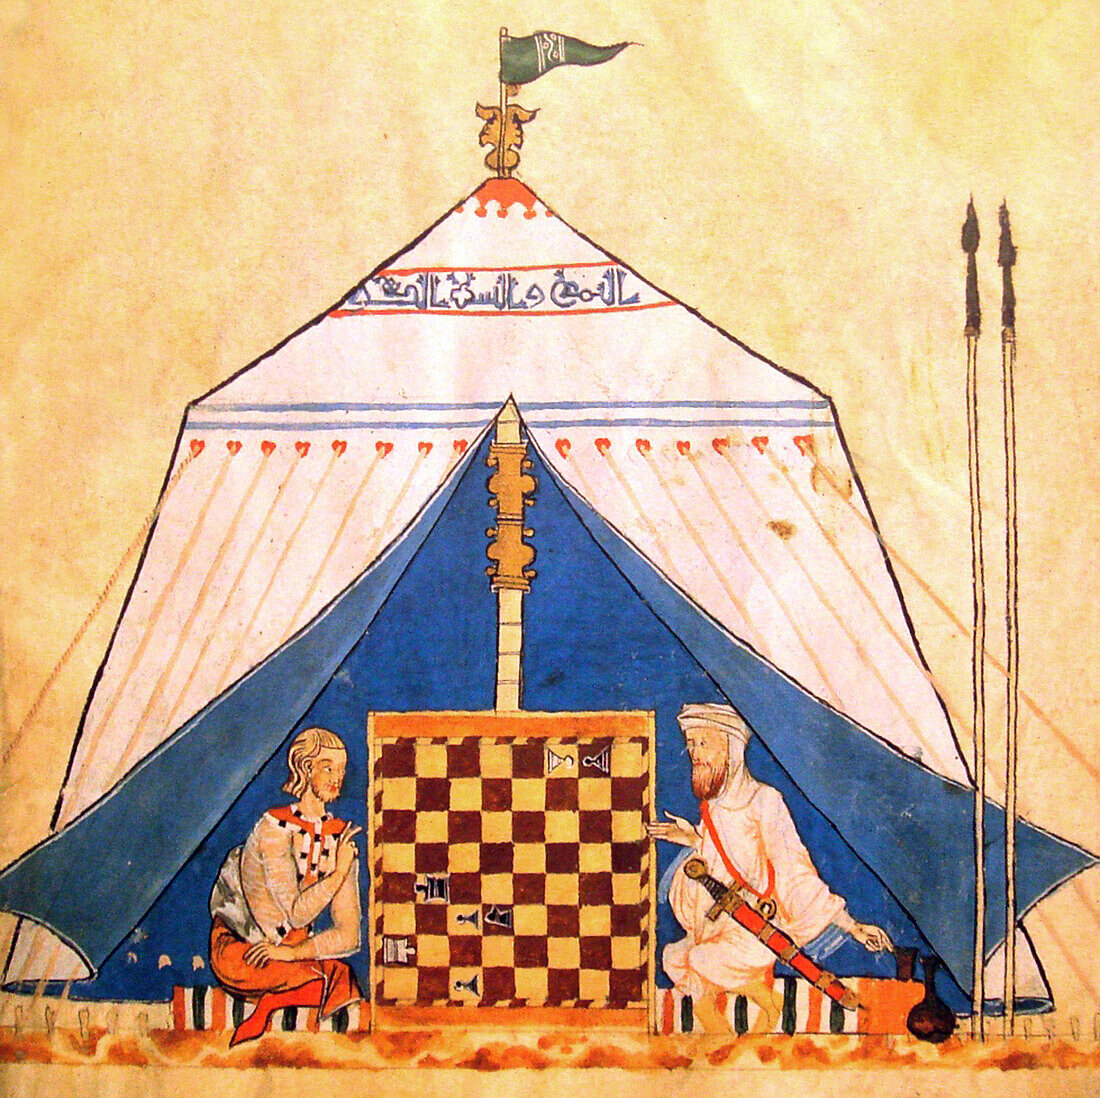 Christian and Muslim playing chess, 1285 illustration